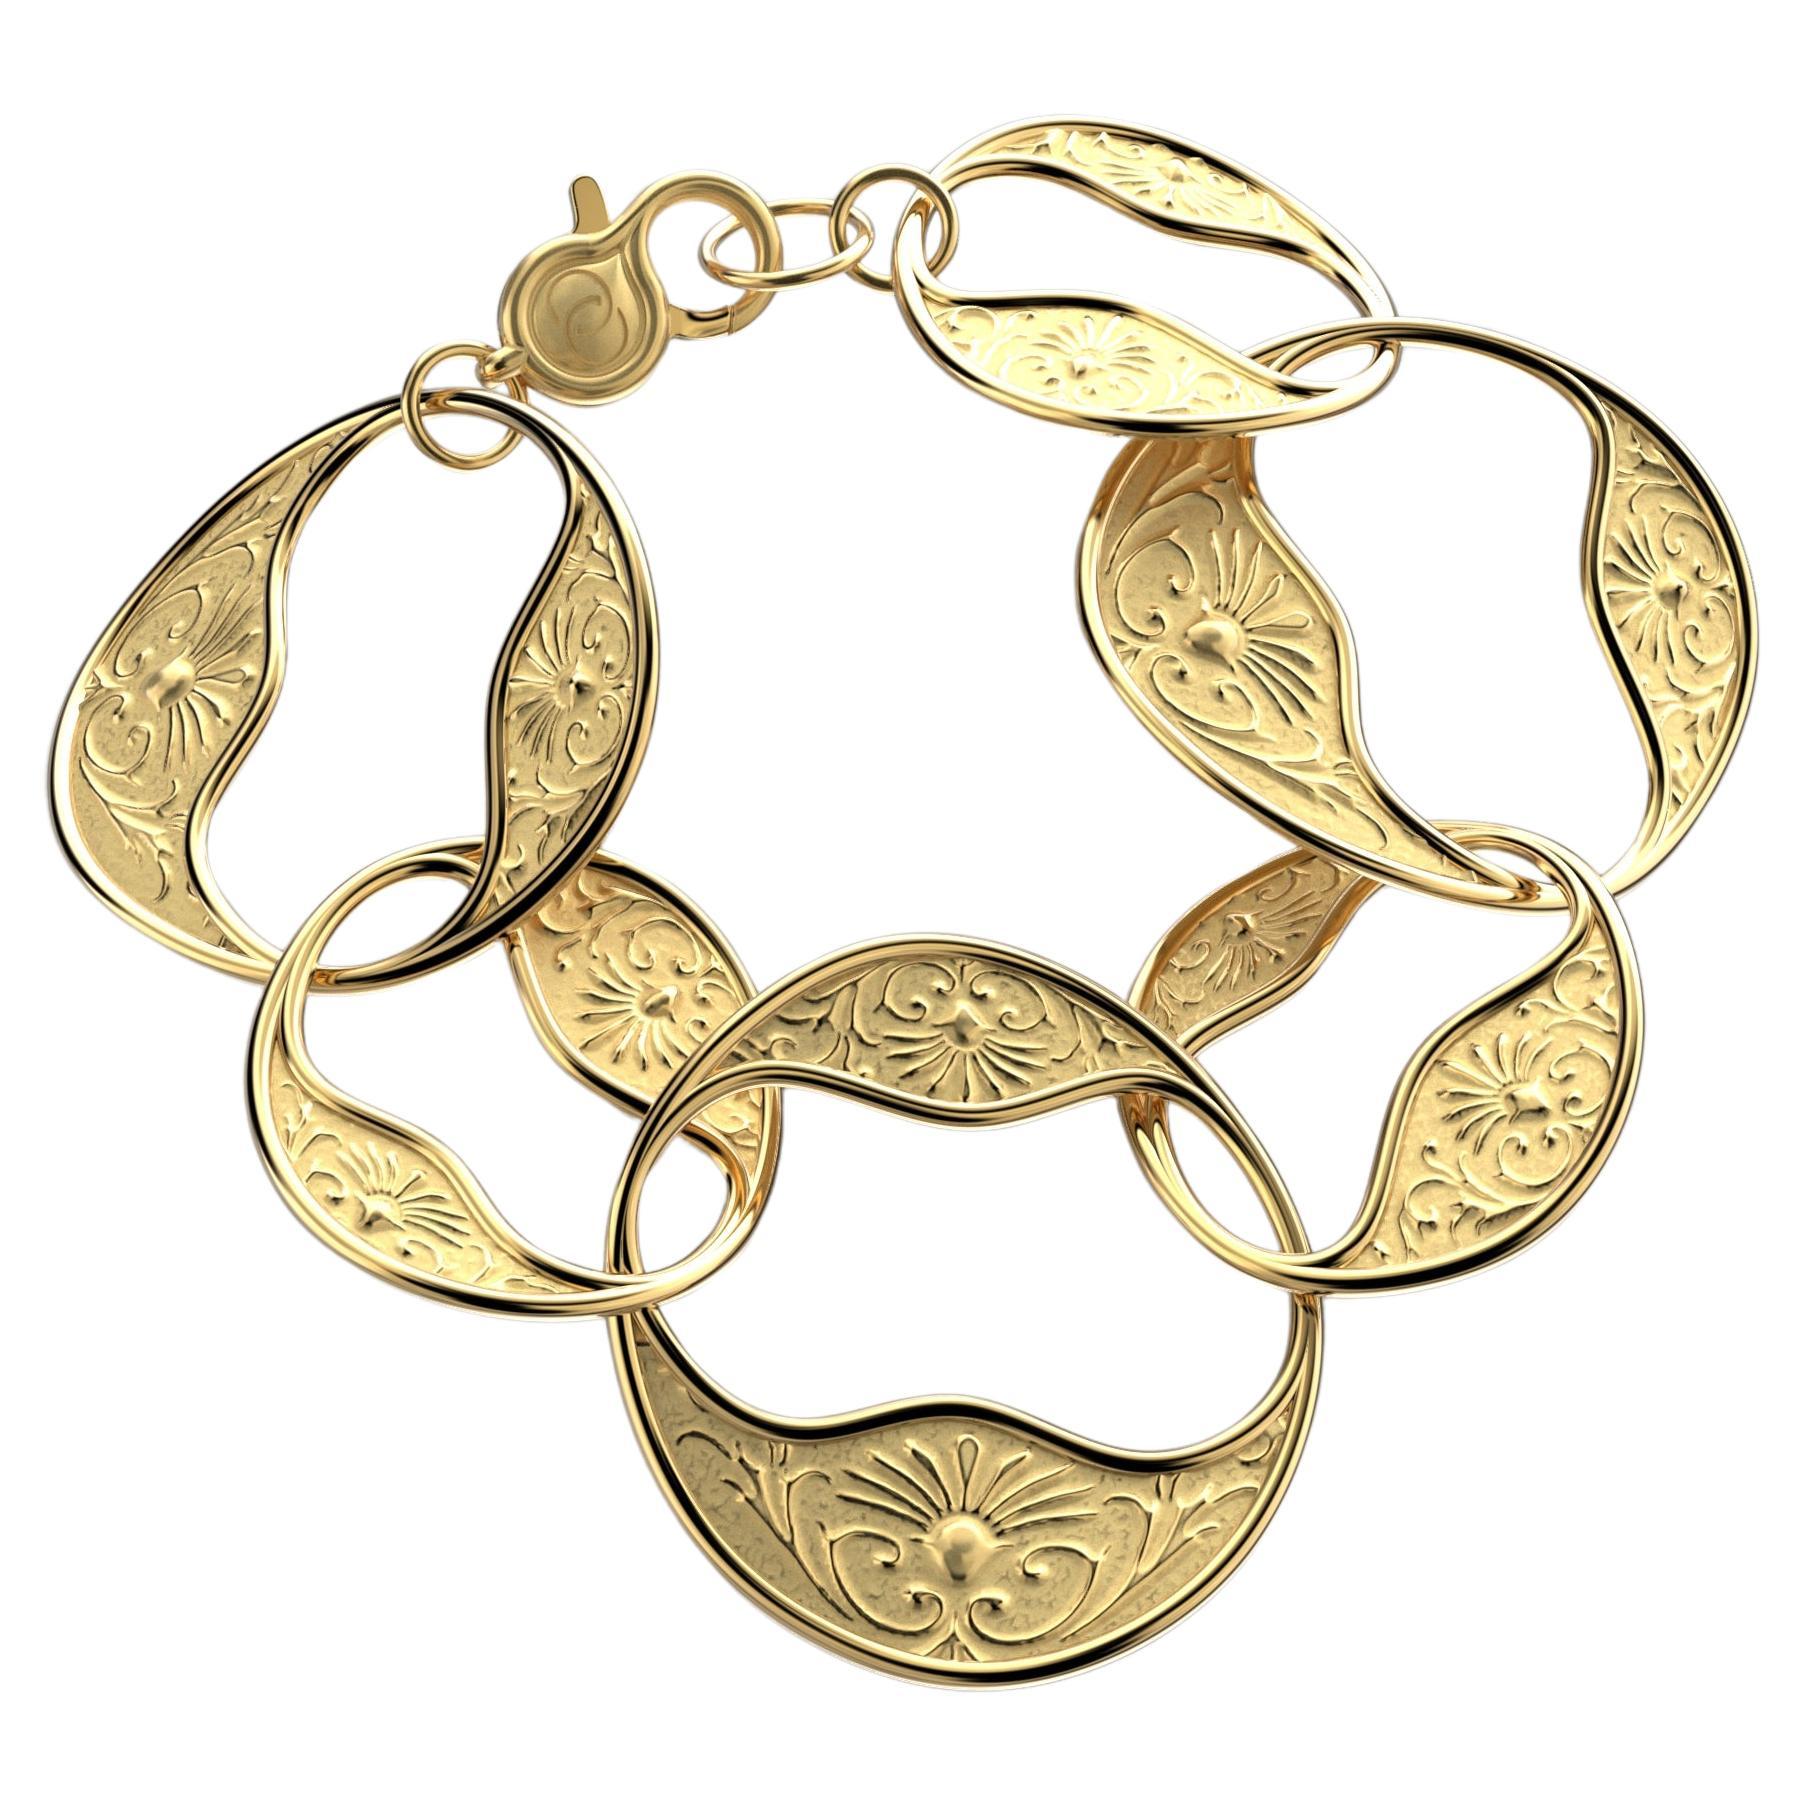 18k Gold Link Bracelet in Baroque Style | Made in Italy by Oltremare Gioielli